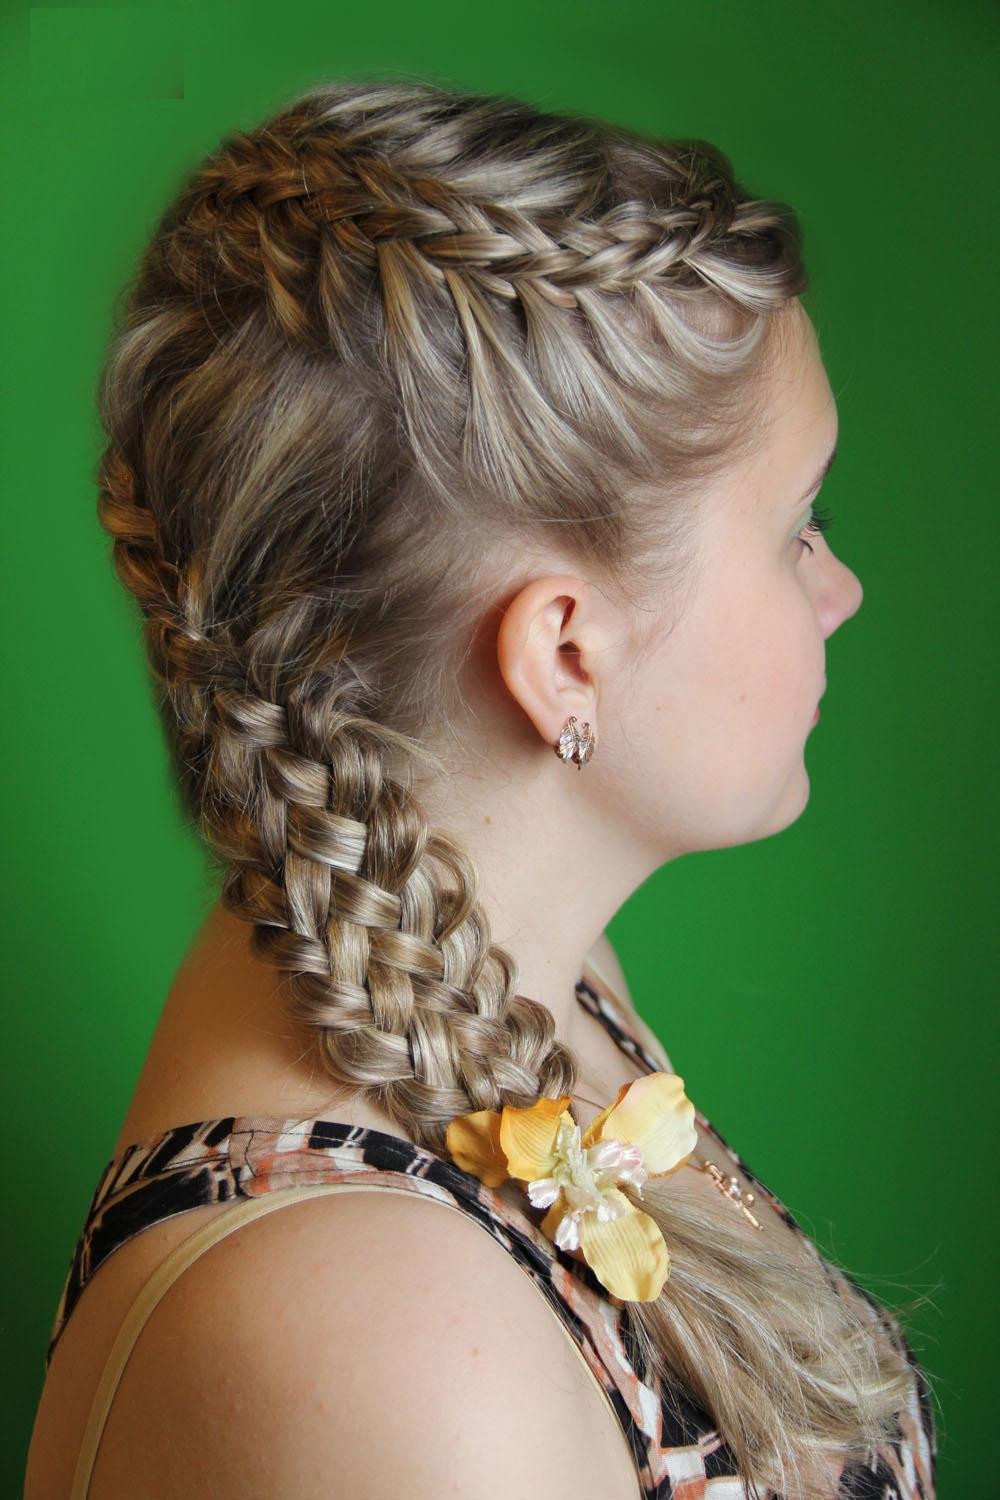 Hairstyles For Braiding Hair
 Top 8 Side Braid Hairstyles For Girls HairzStyle